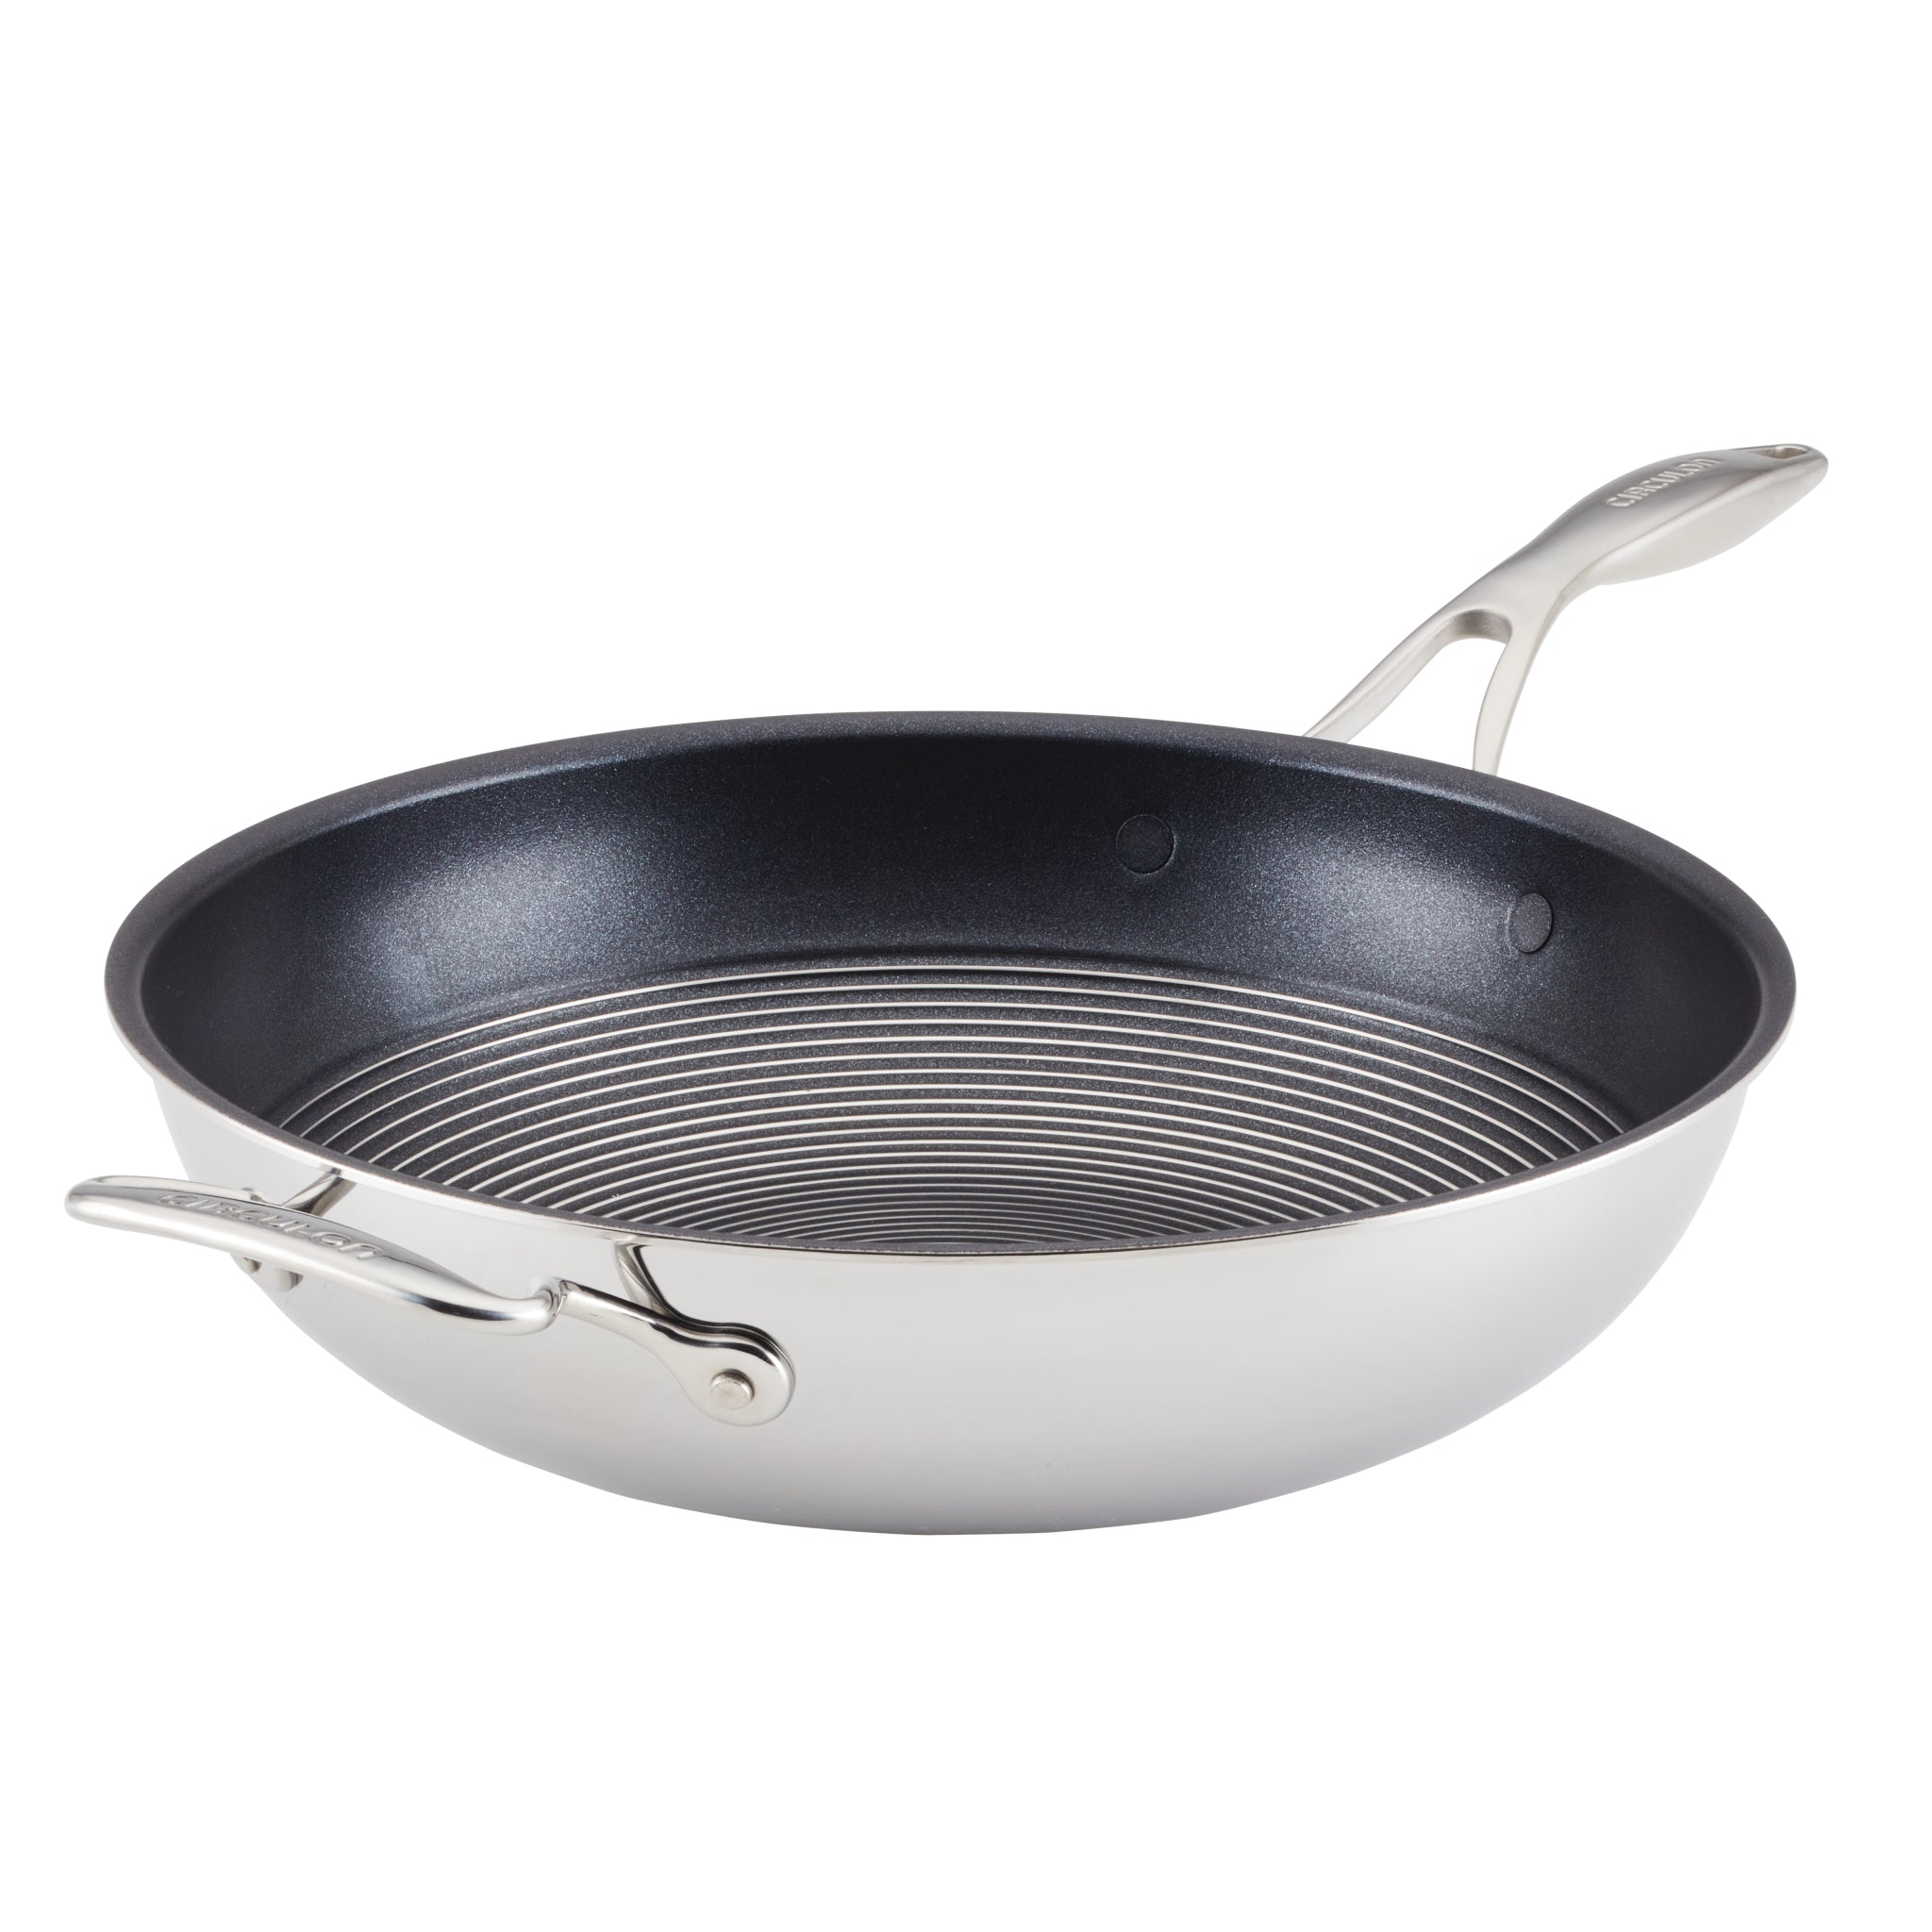 Circulon Clad Stainless Steel Wok/Stir Fry with Glass Lid and